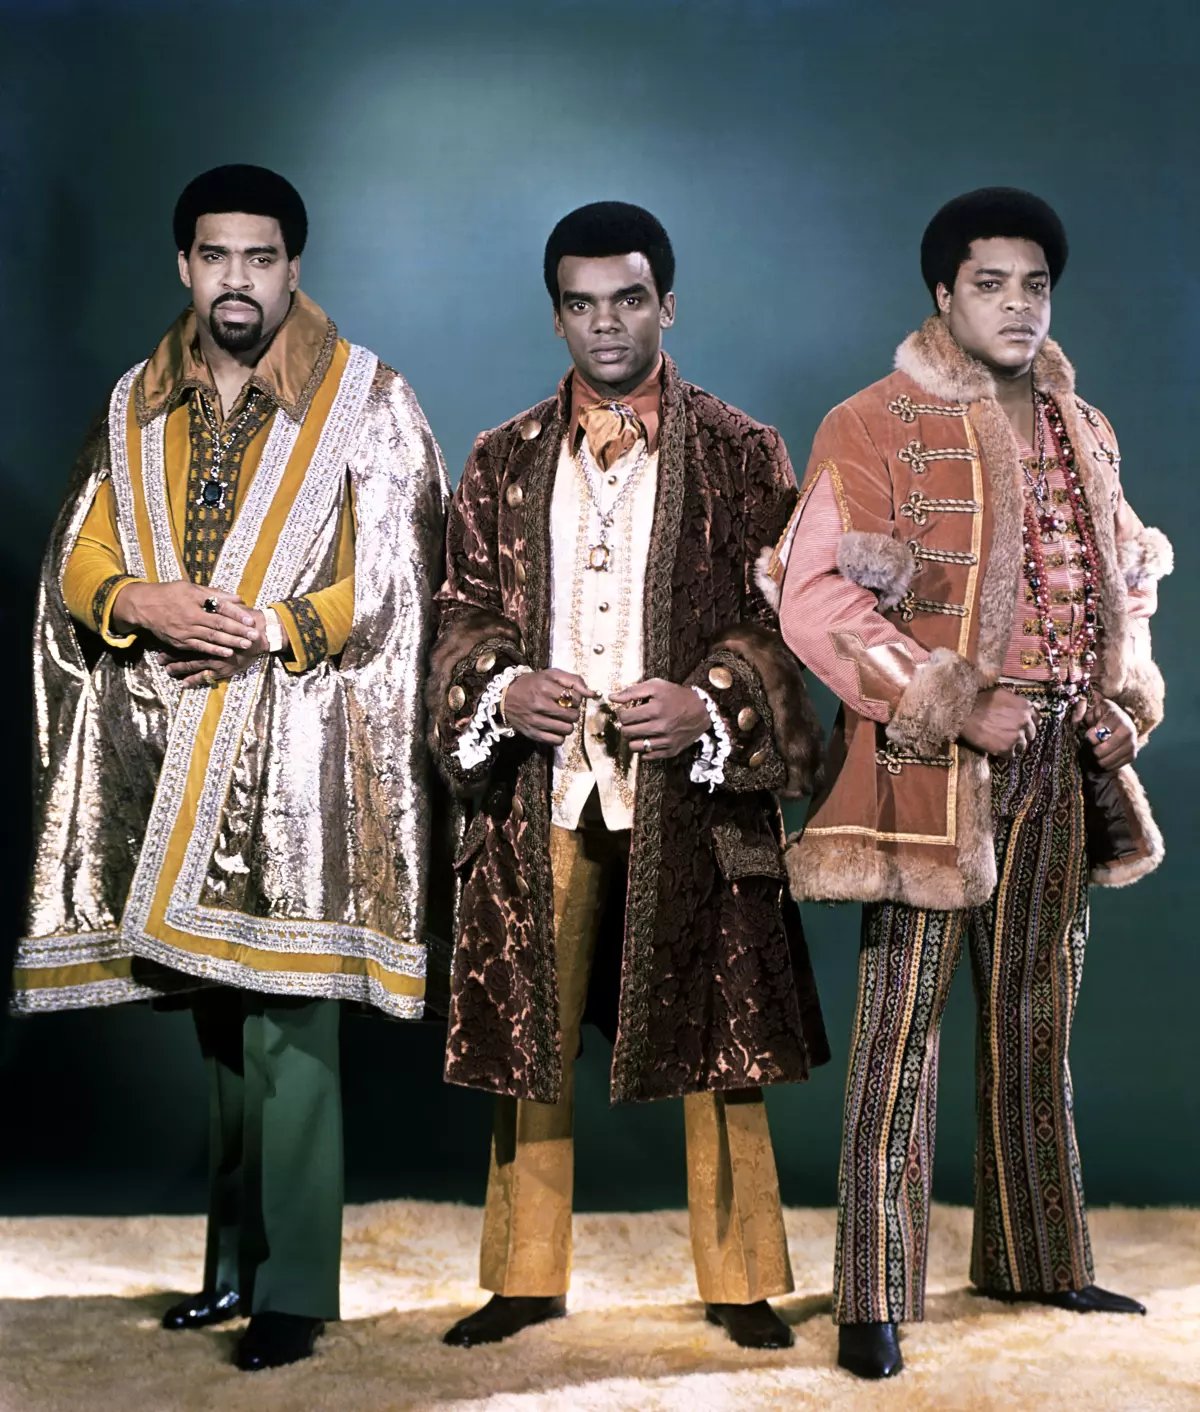 Rudolph Isley (left) with Ronald Isley (middle) and O'Kelly Isley Jr. (right)